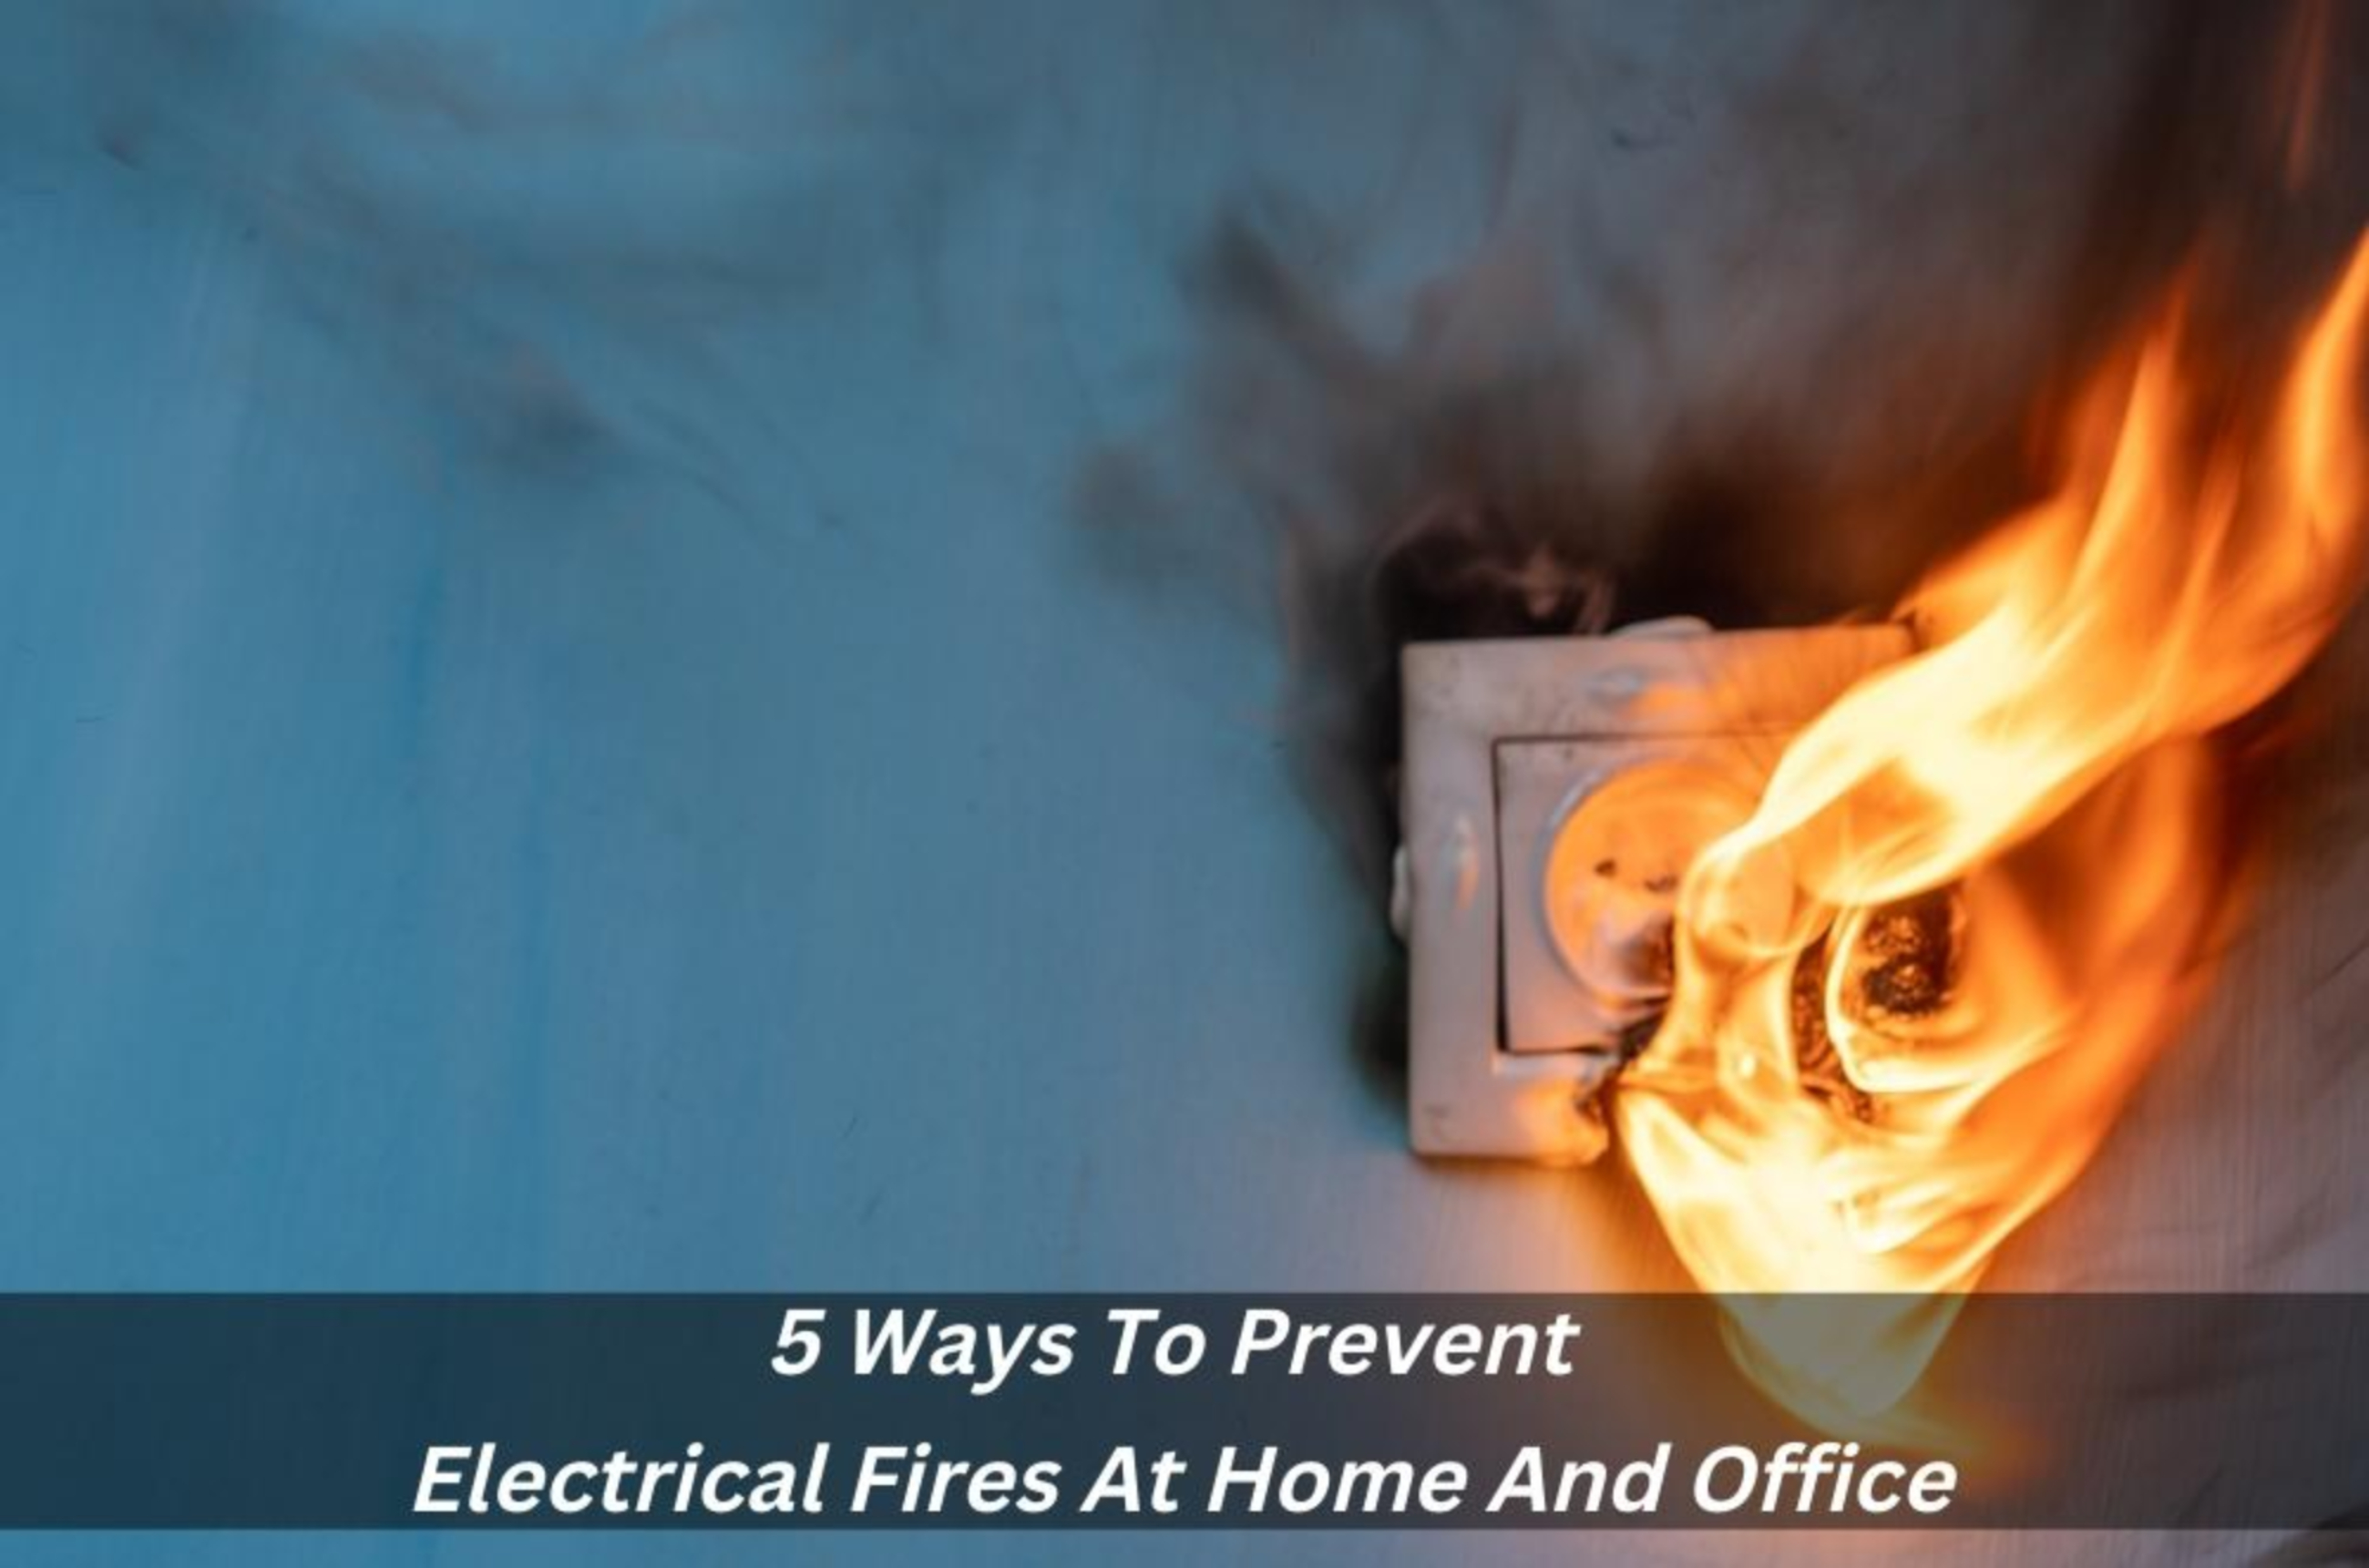 5 Ways To Prevent Electrical Fires At Home And Office - Electrability